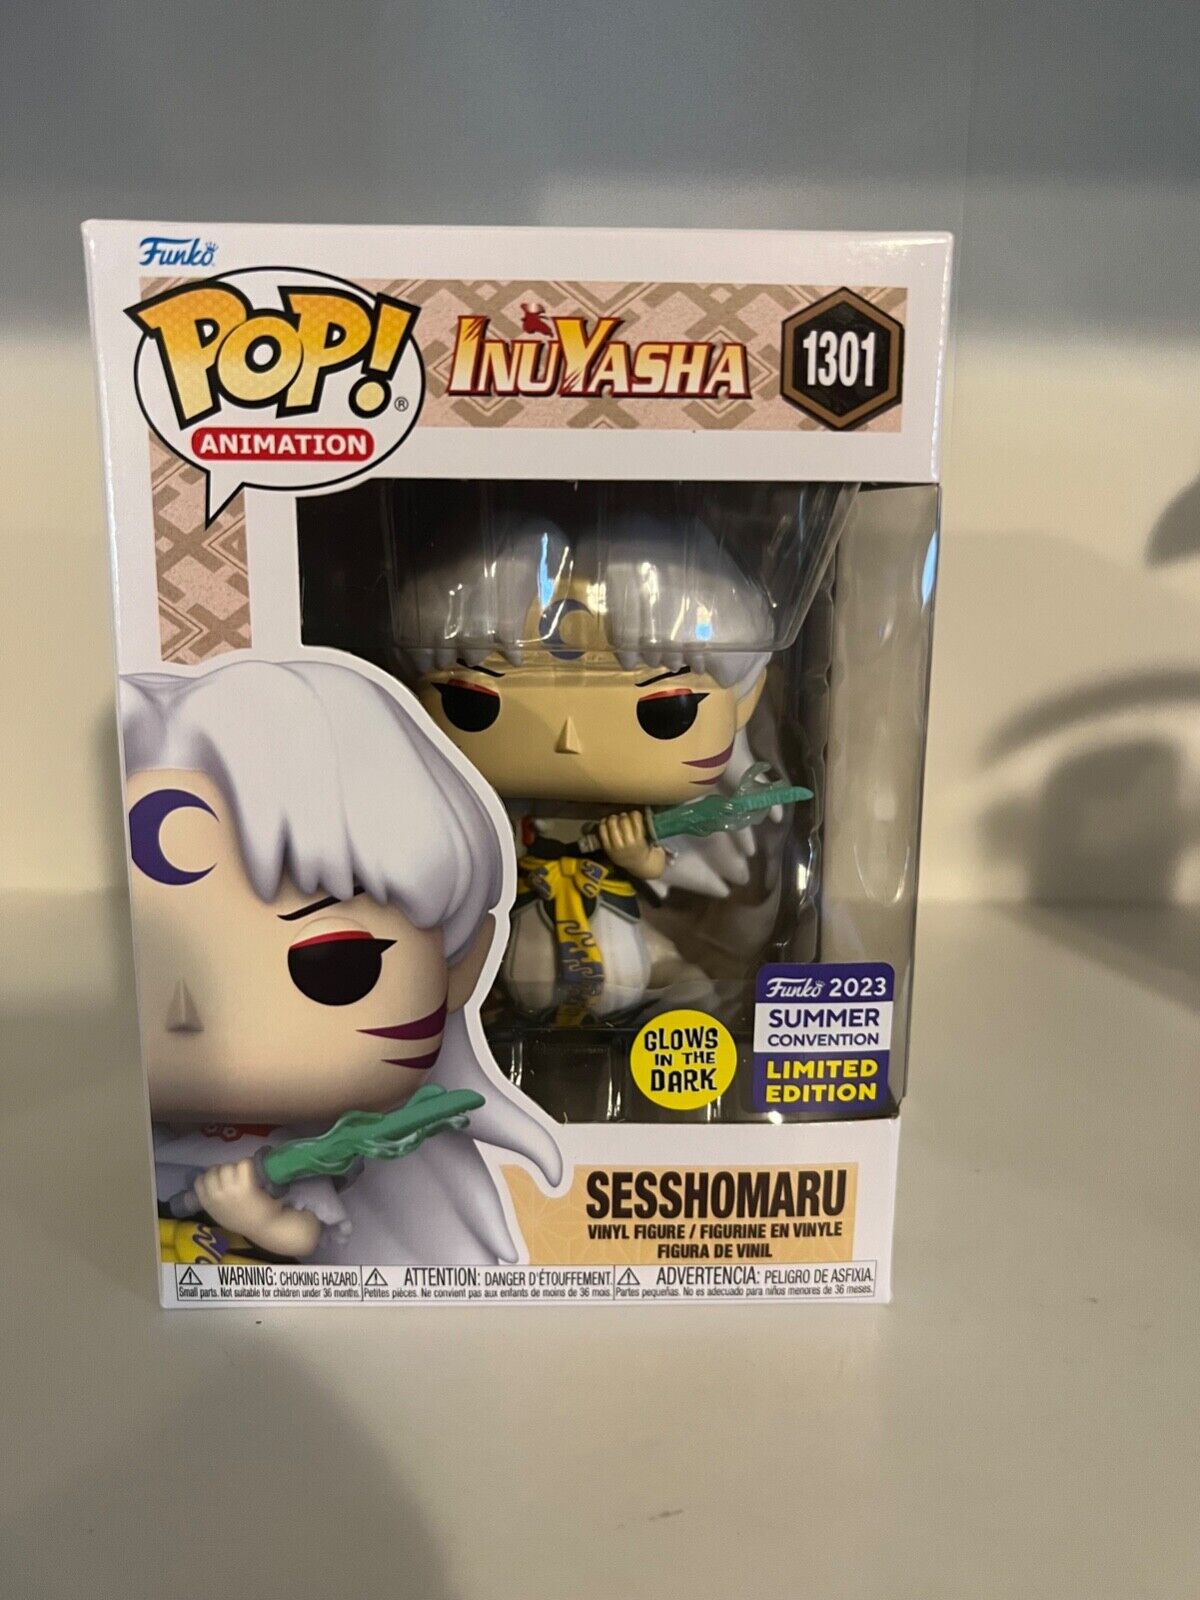 IN HAND SUMMER CONVENTION SESSHOMARU WITH SWORD GLOW Animation #1301 Inuyasha